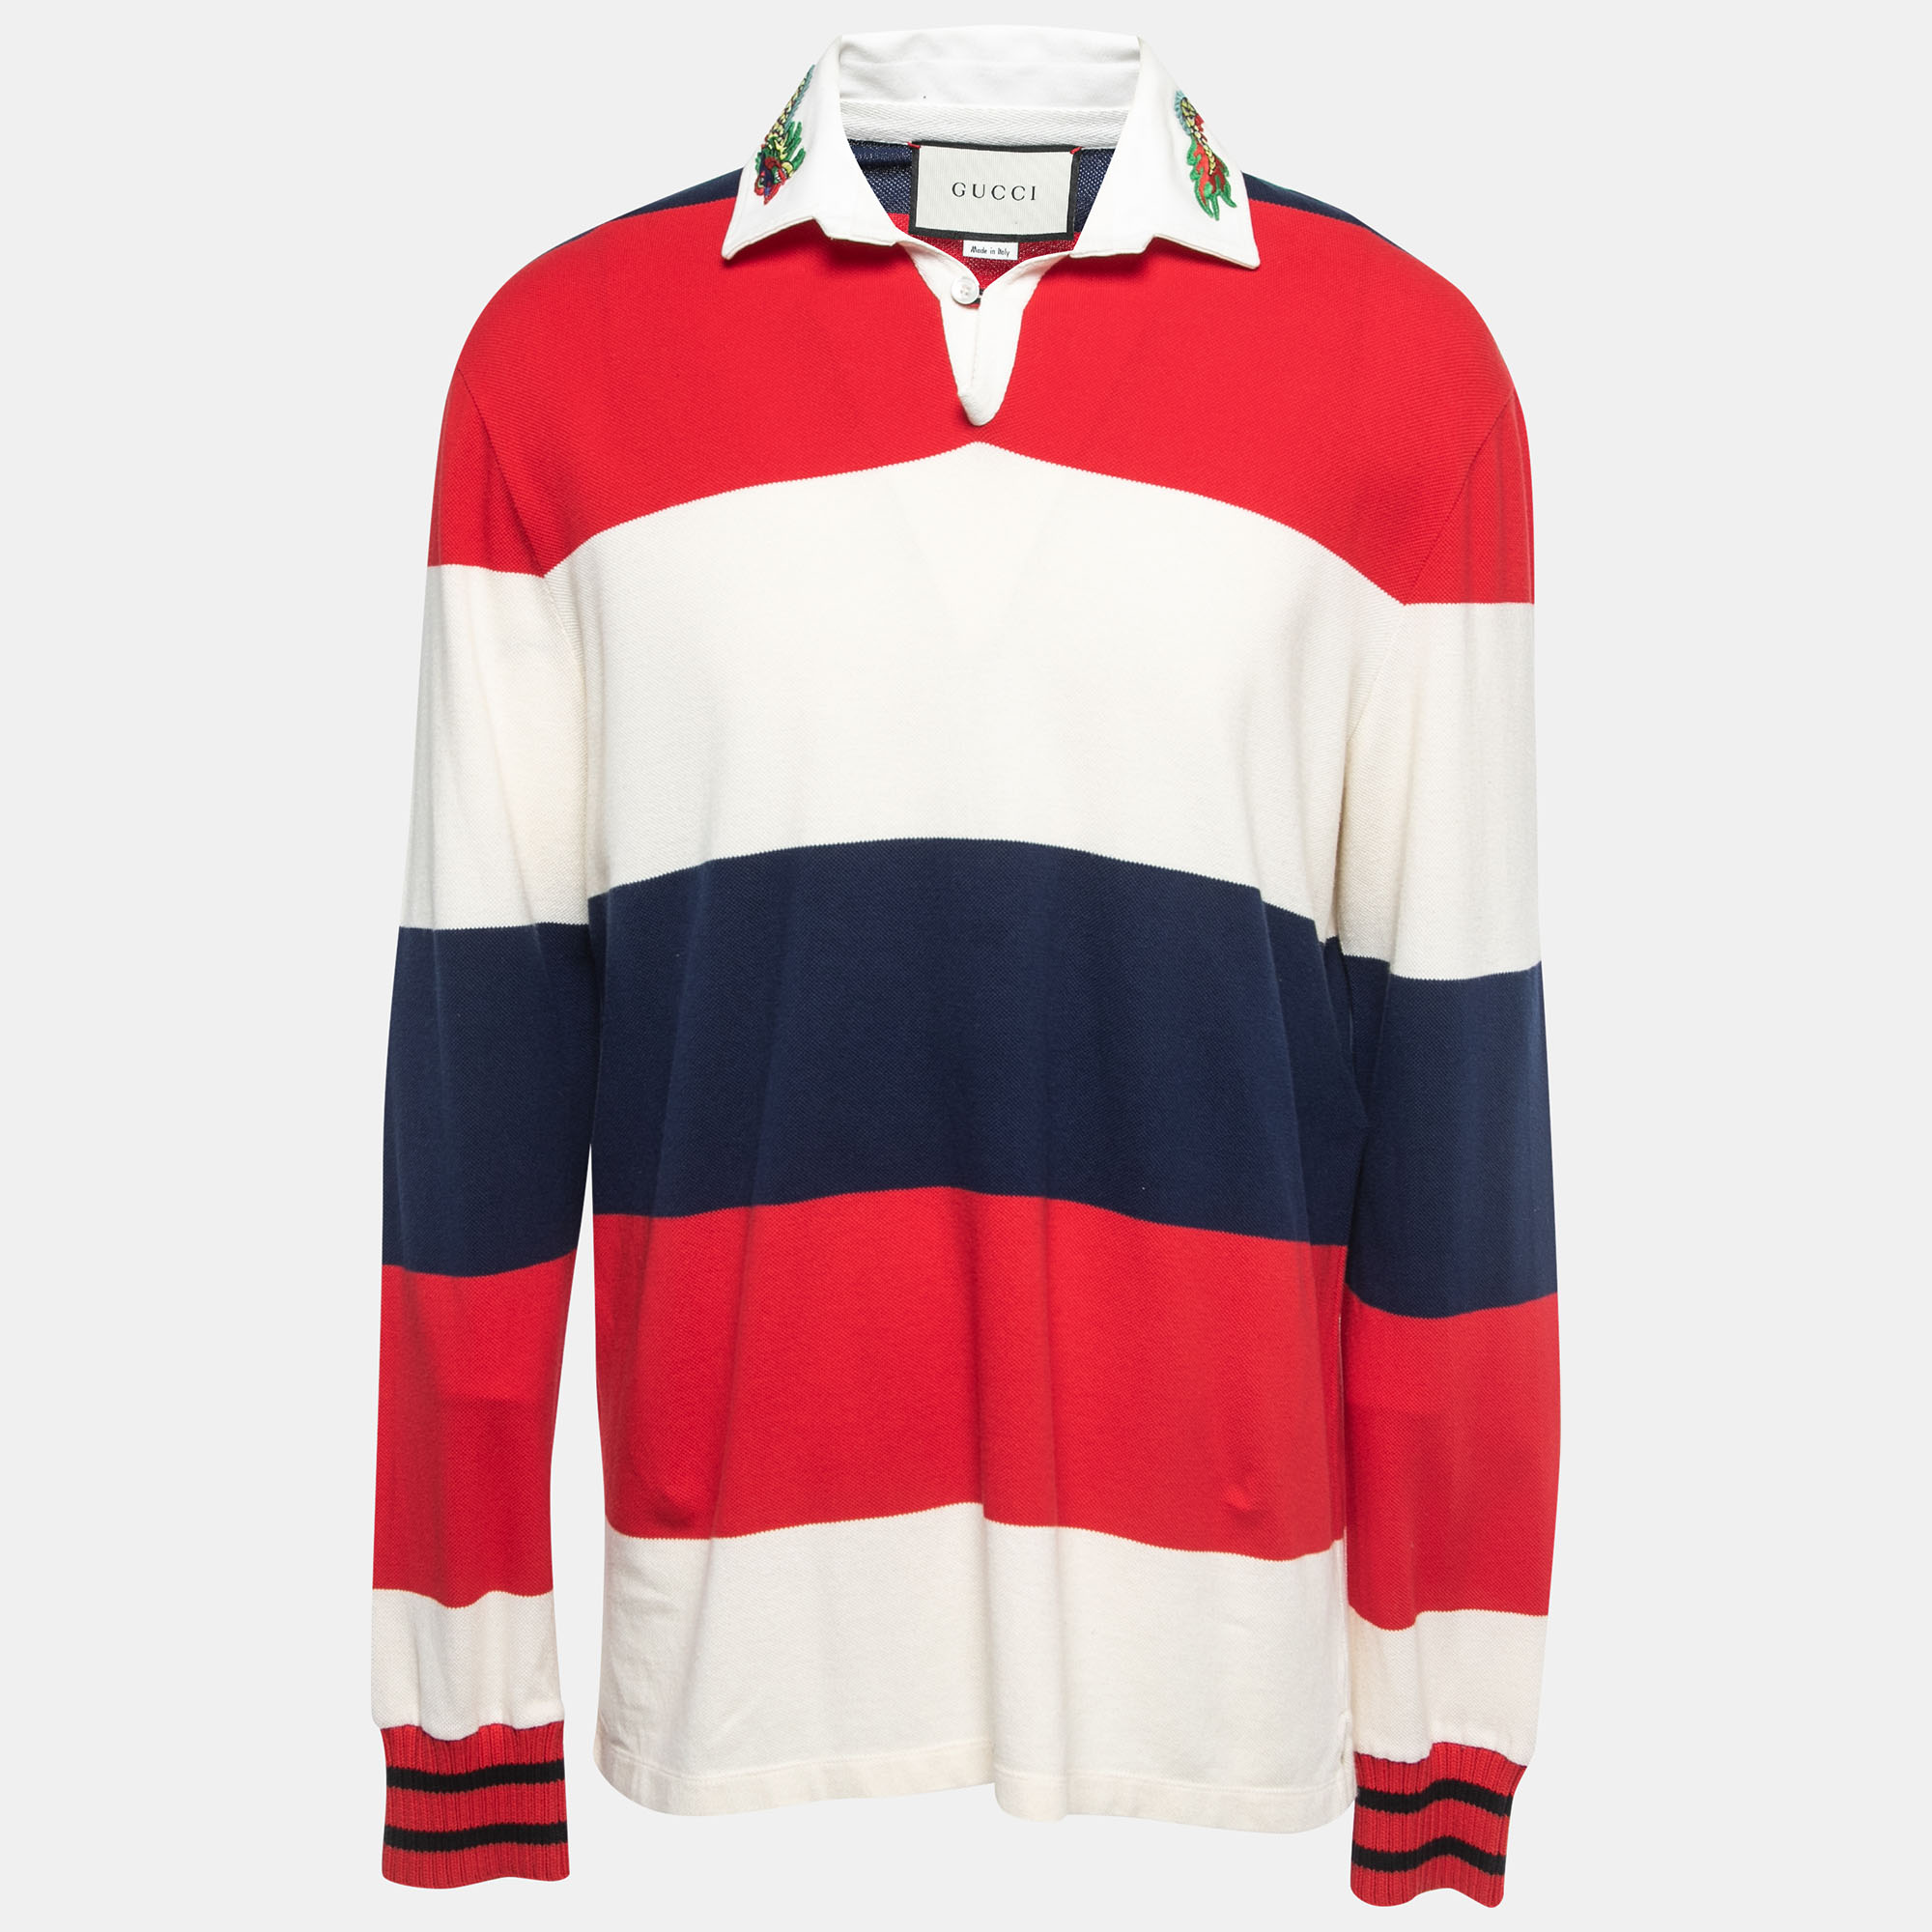 Gucci Multicolor Striped Cotton Knit Contrast Collar Detail Long Sleeve T-Shirt XL